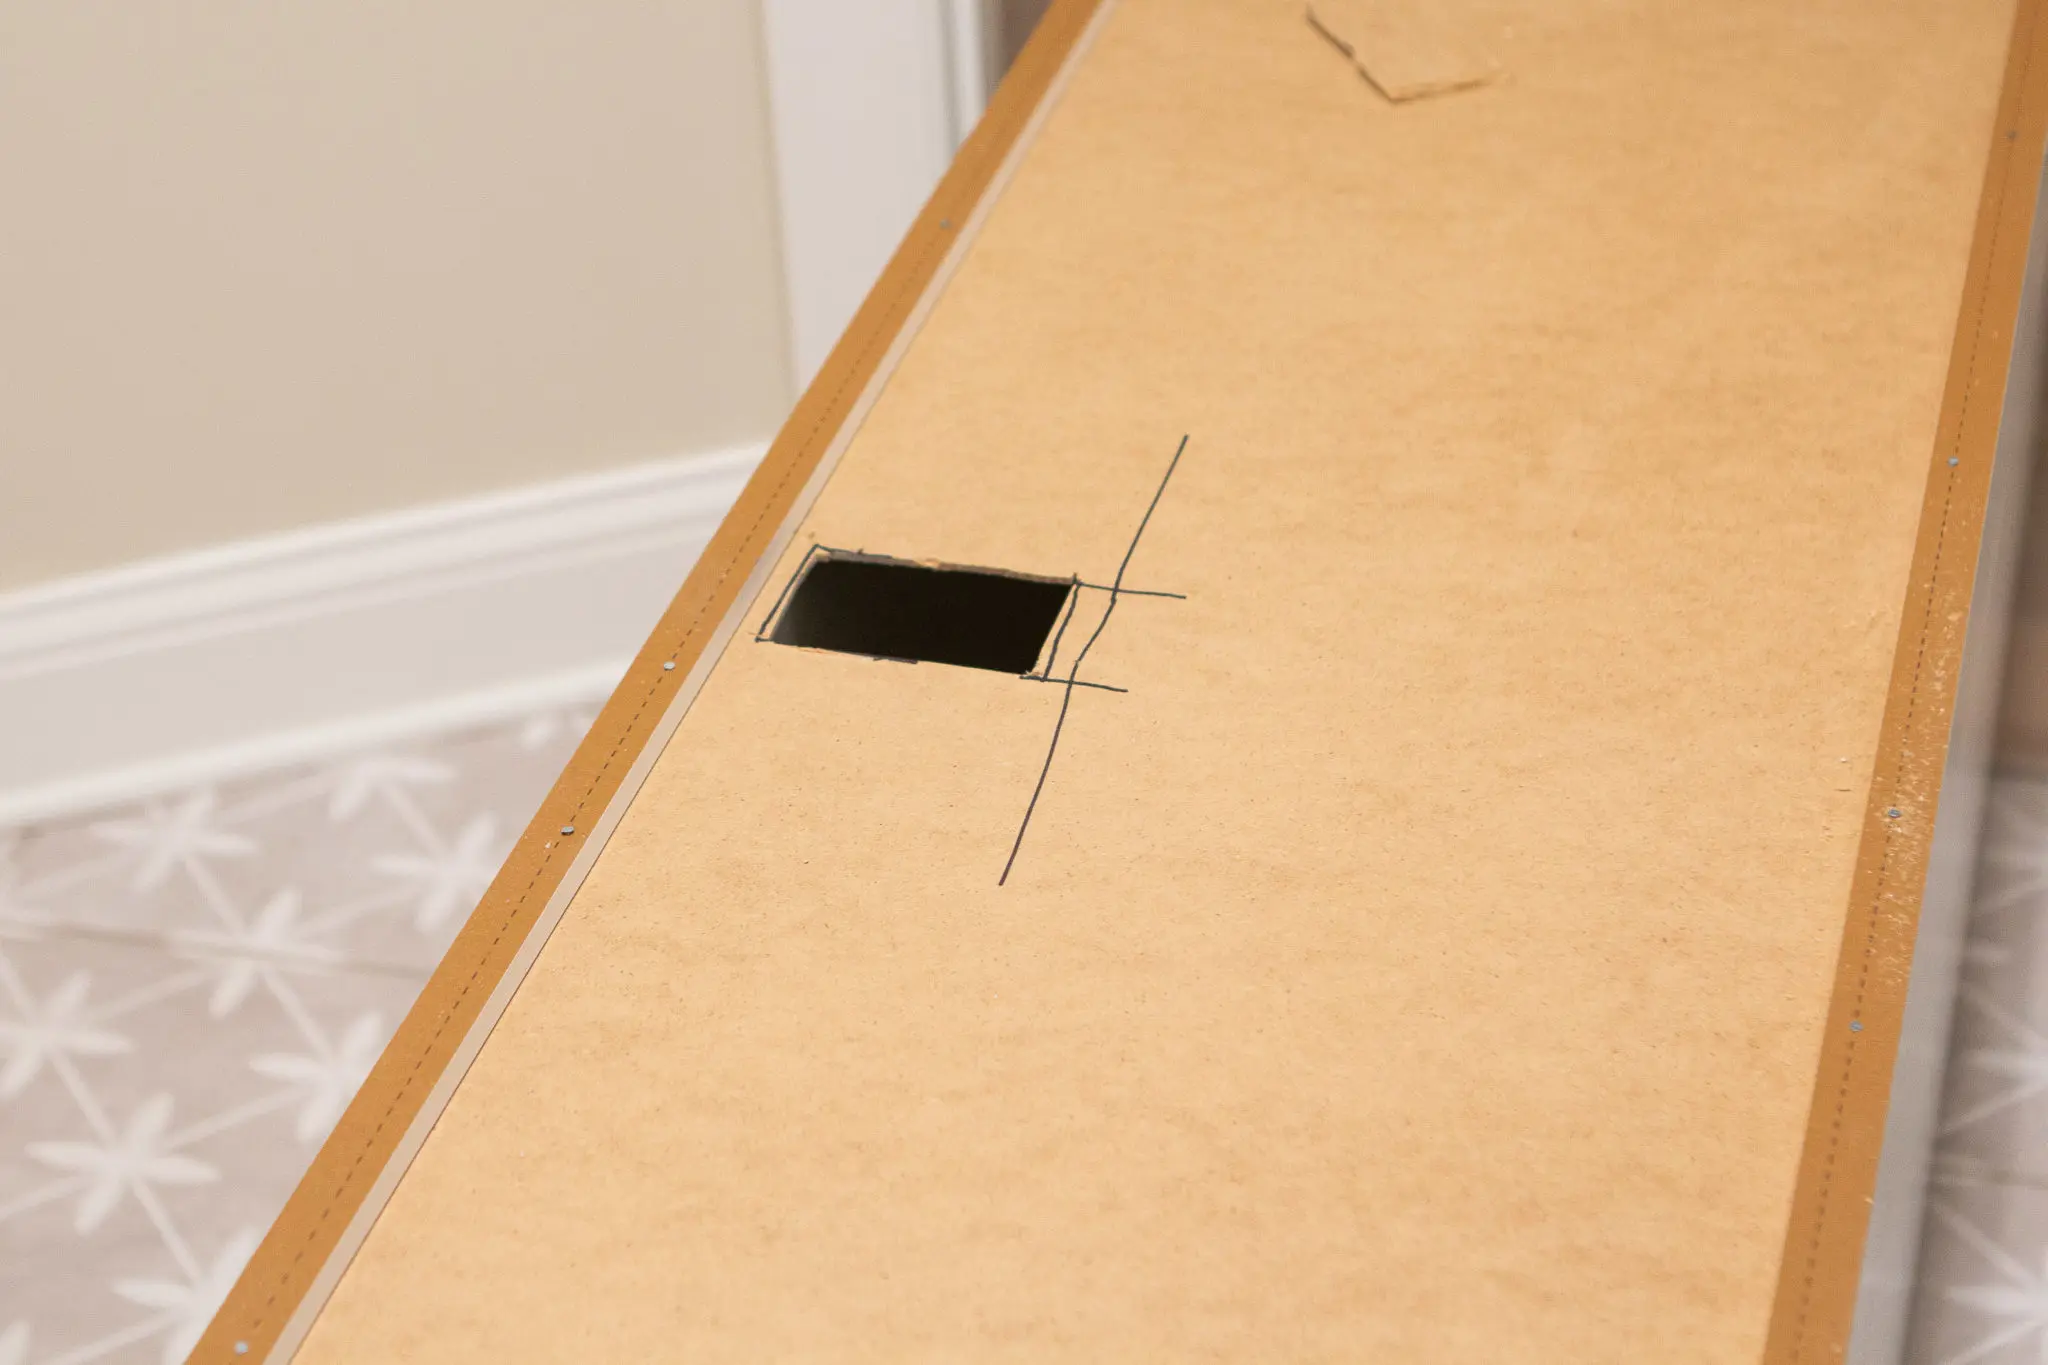 Cutting the back of IKEA kitchen cabinets for outlet